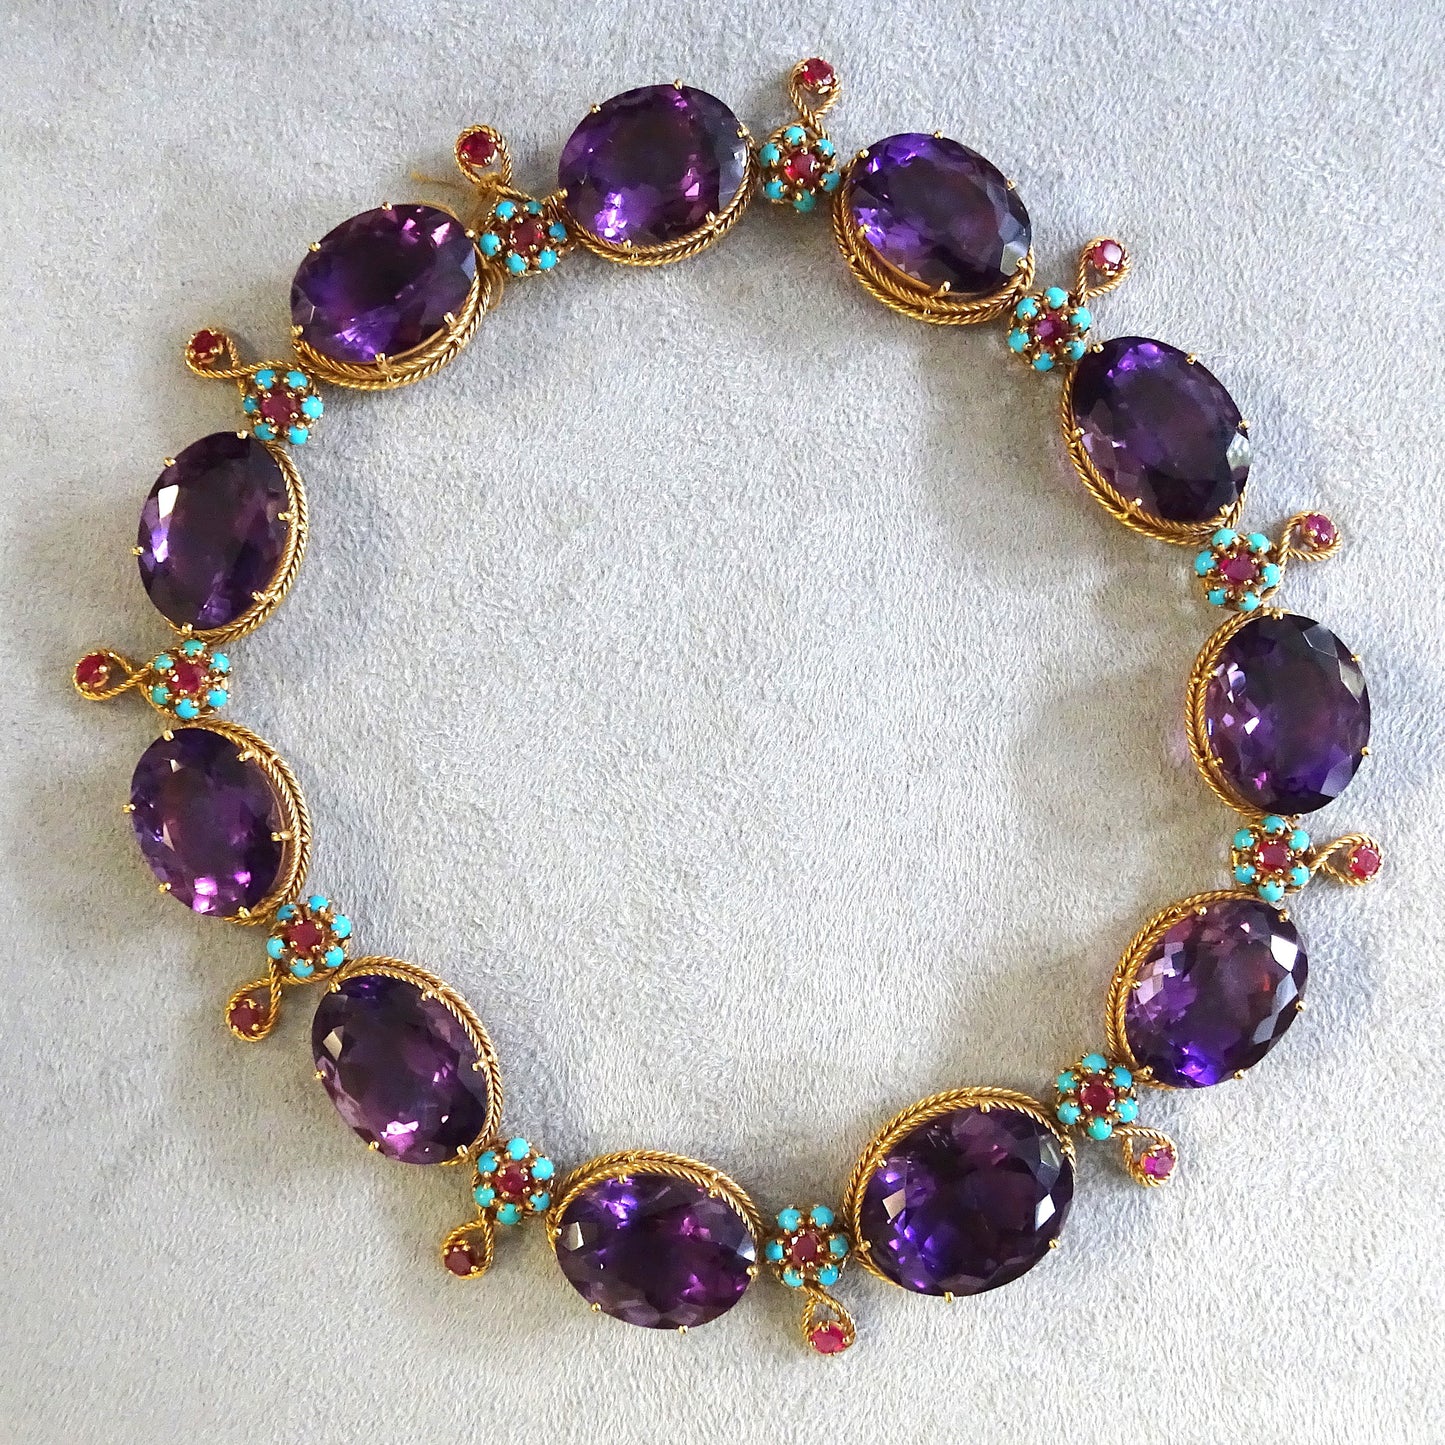 1960s 18KT Yellow Gold Amethyst, Ruby & Turquoise Necklace front